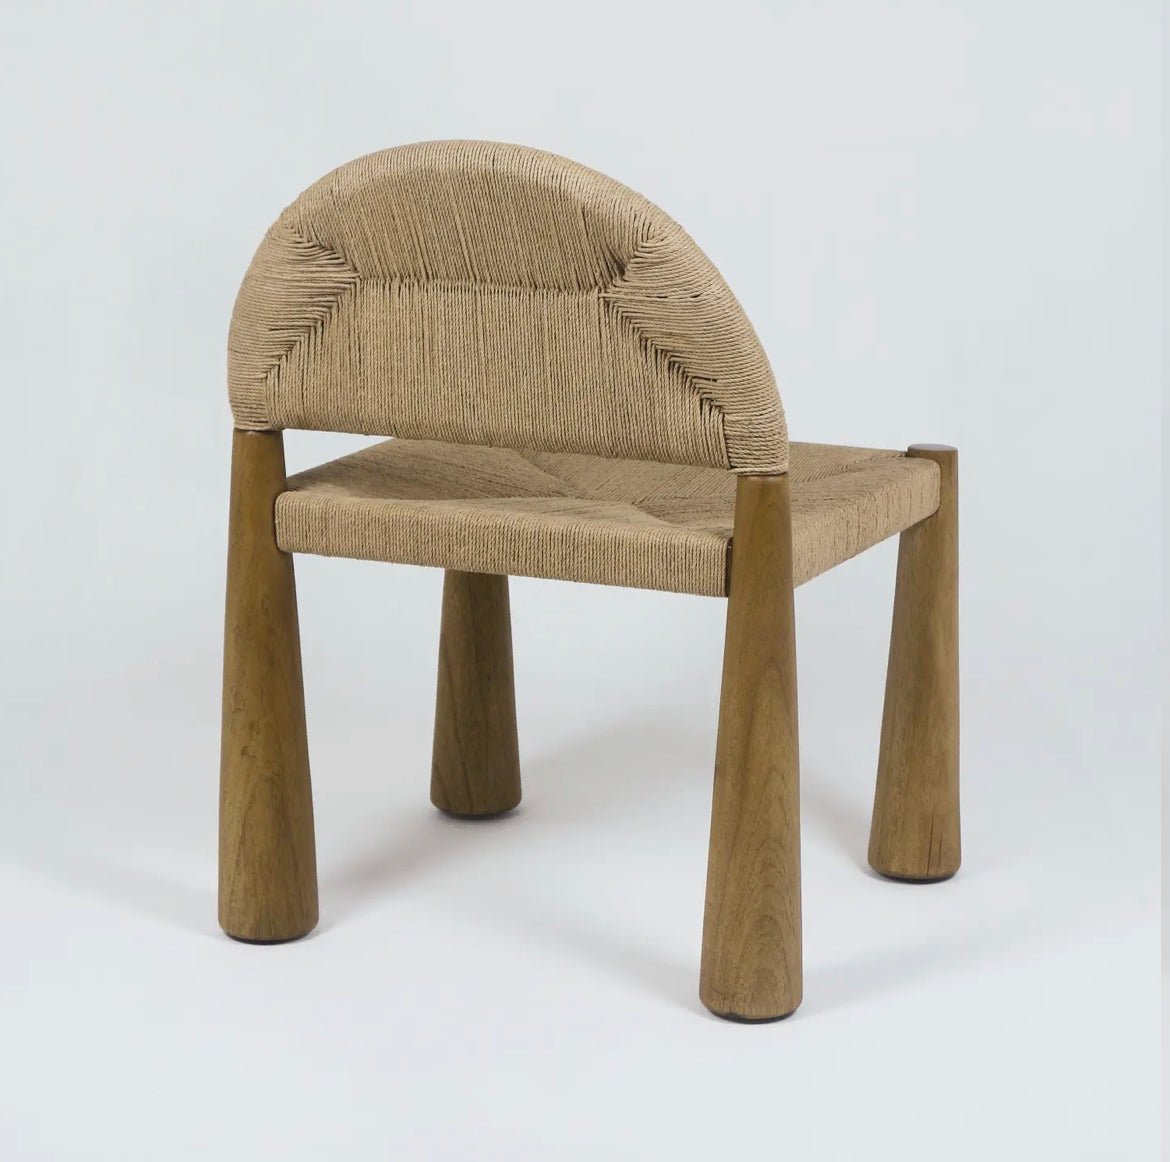 ‘Pho’ Dining Chair (Teak + Seagrass) - EcoLuxe Furnishings